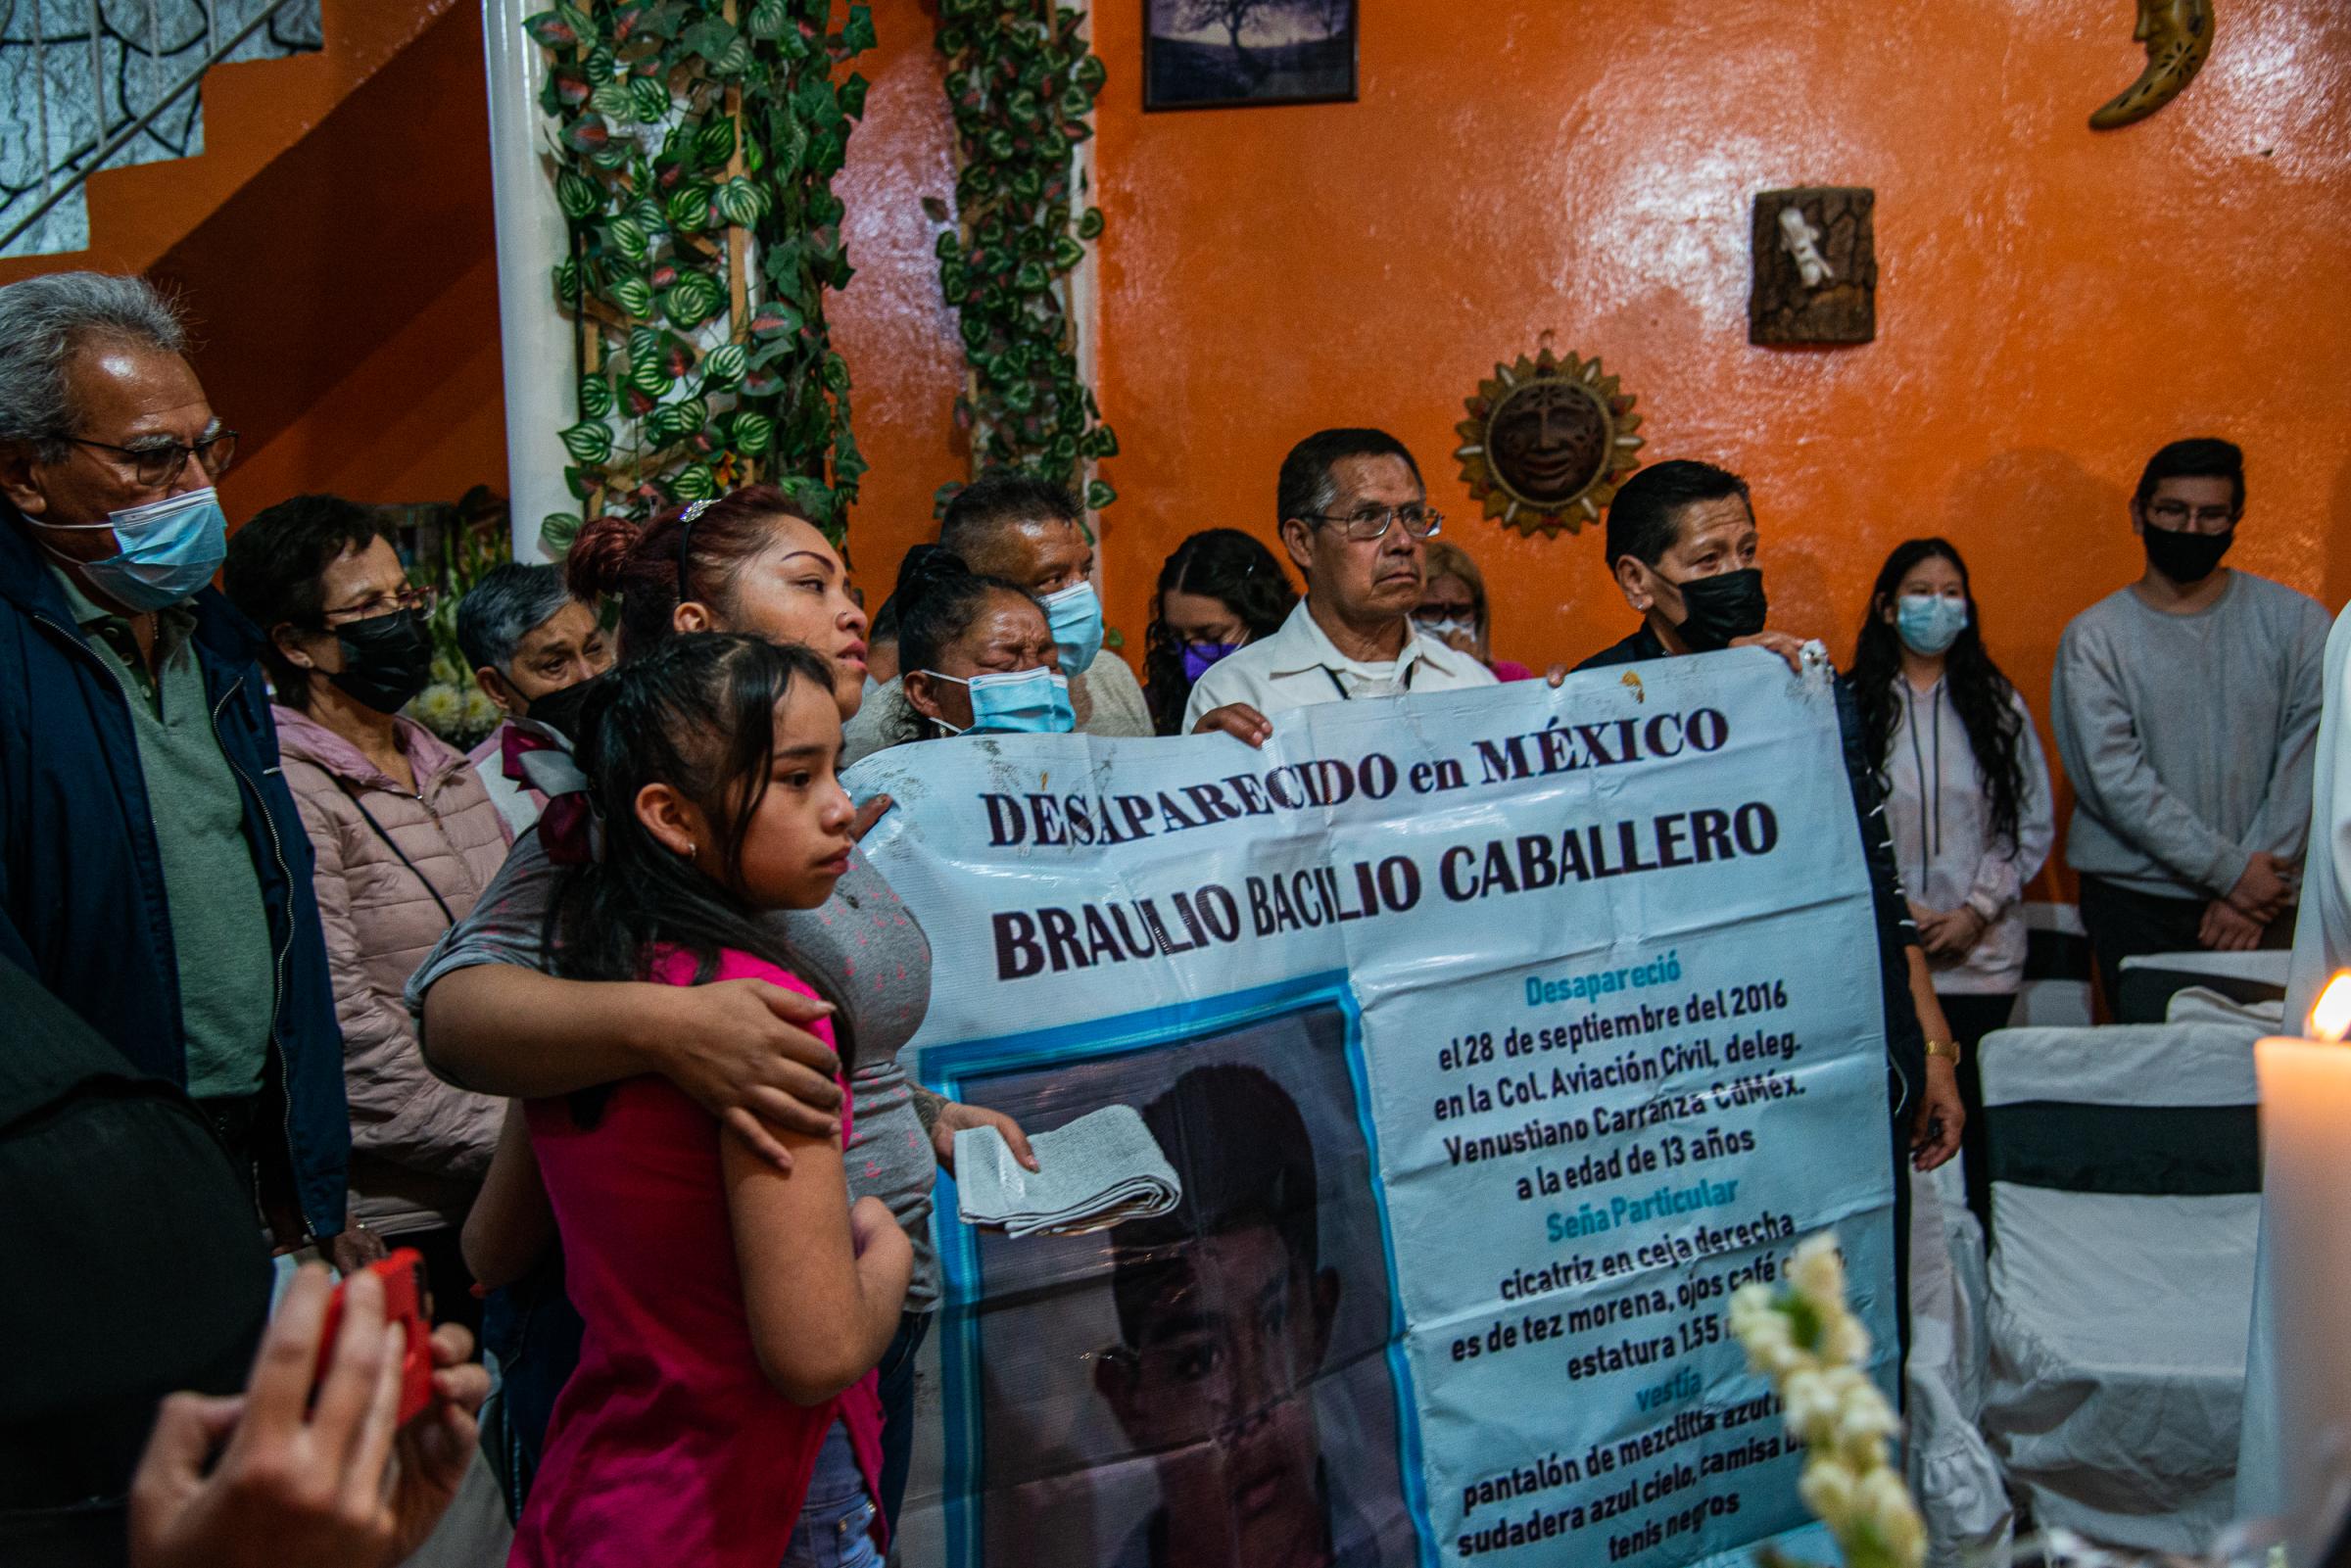 Braulio Bacilio returns home after missing six years -   